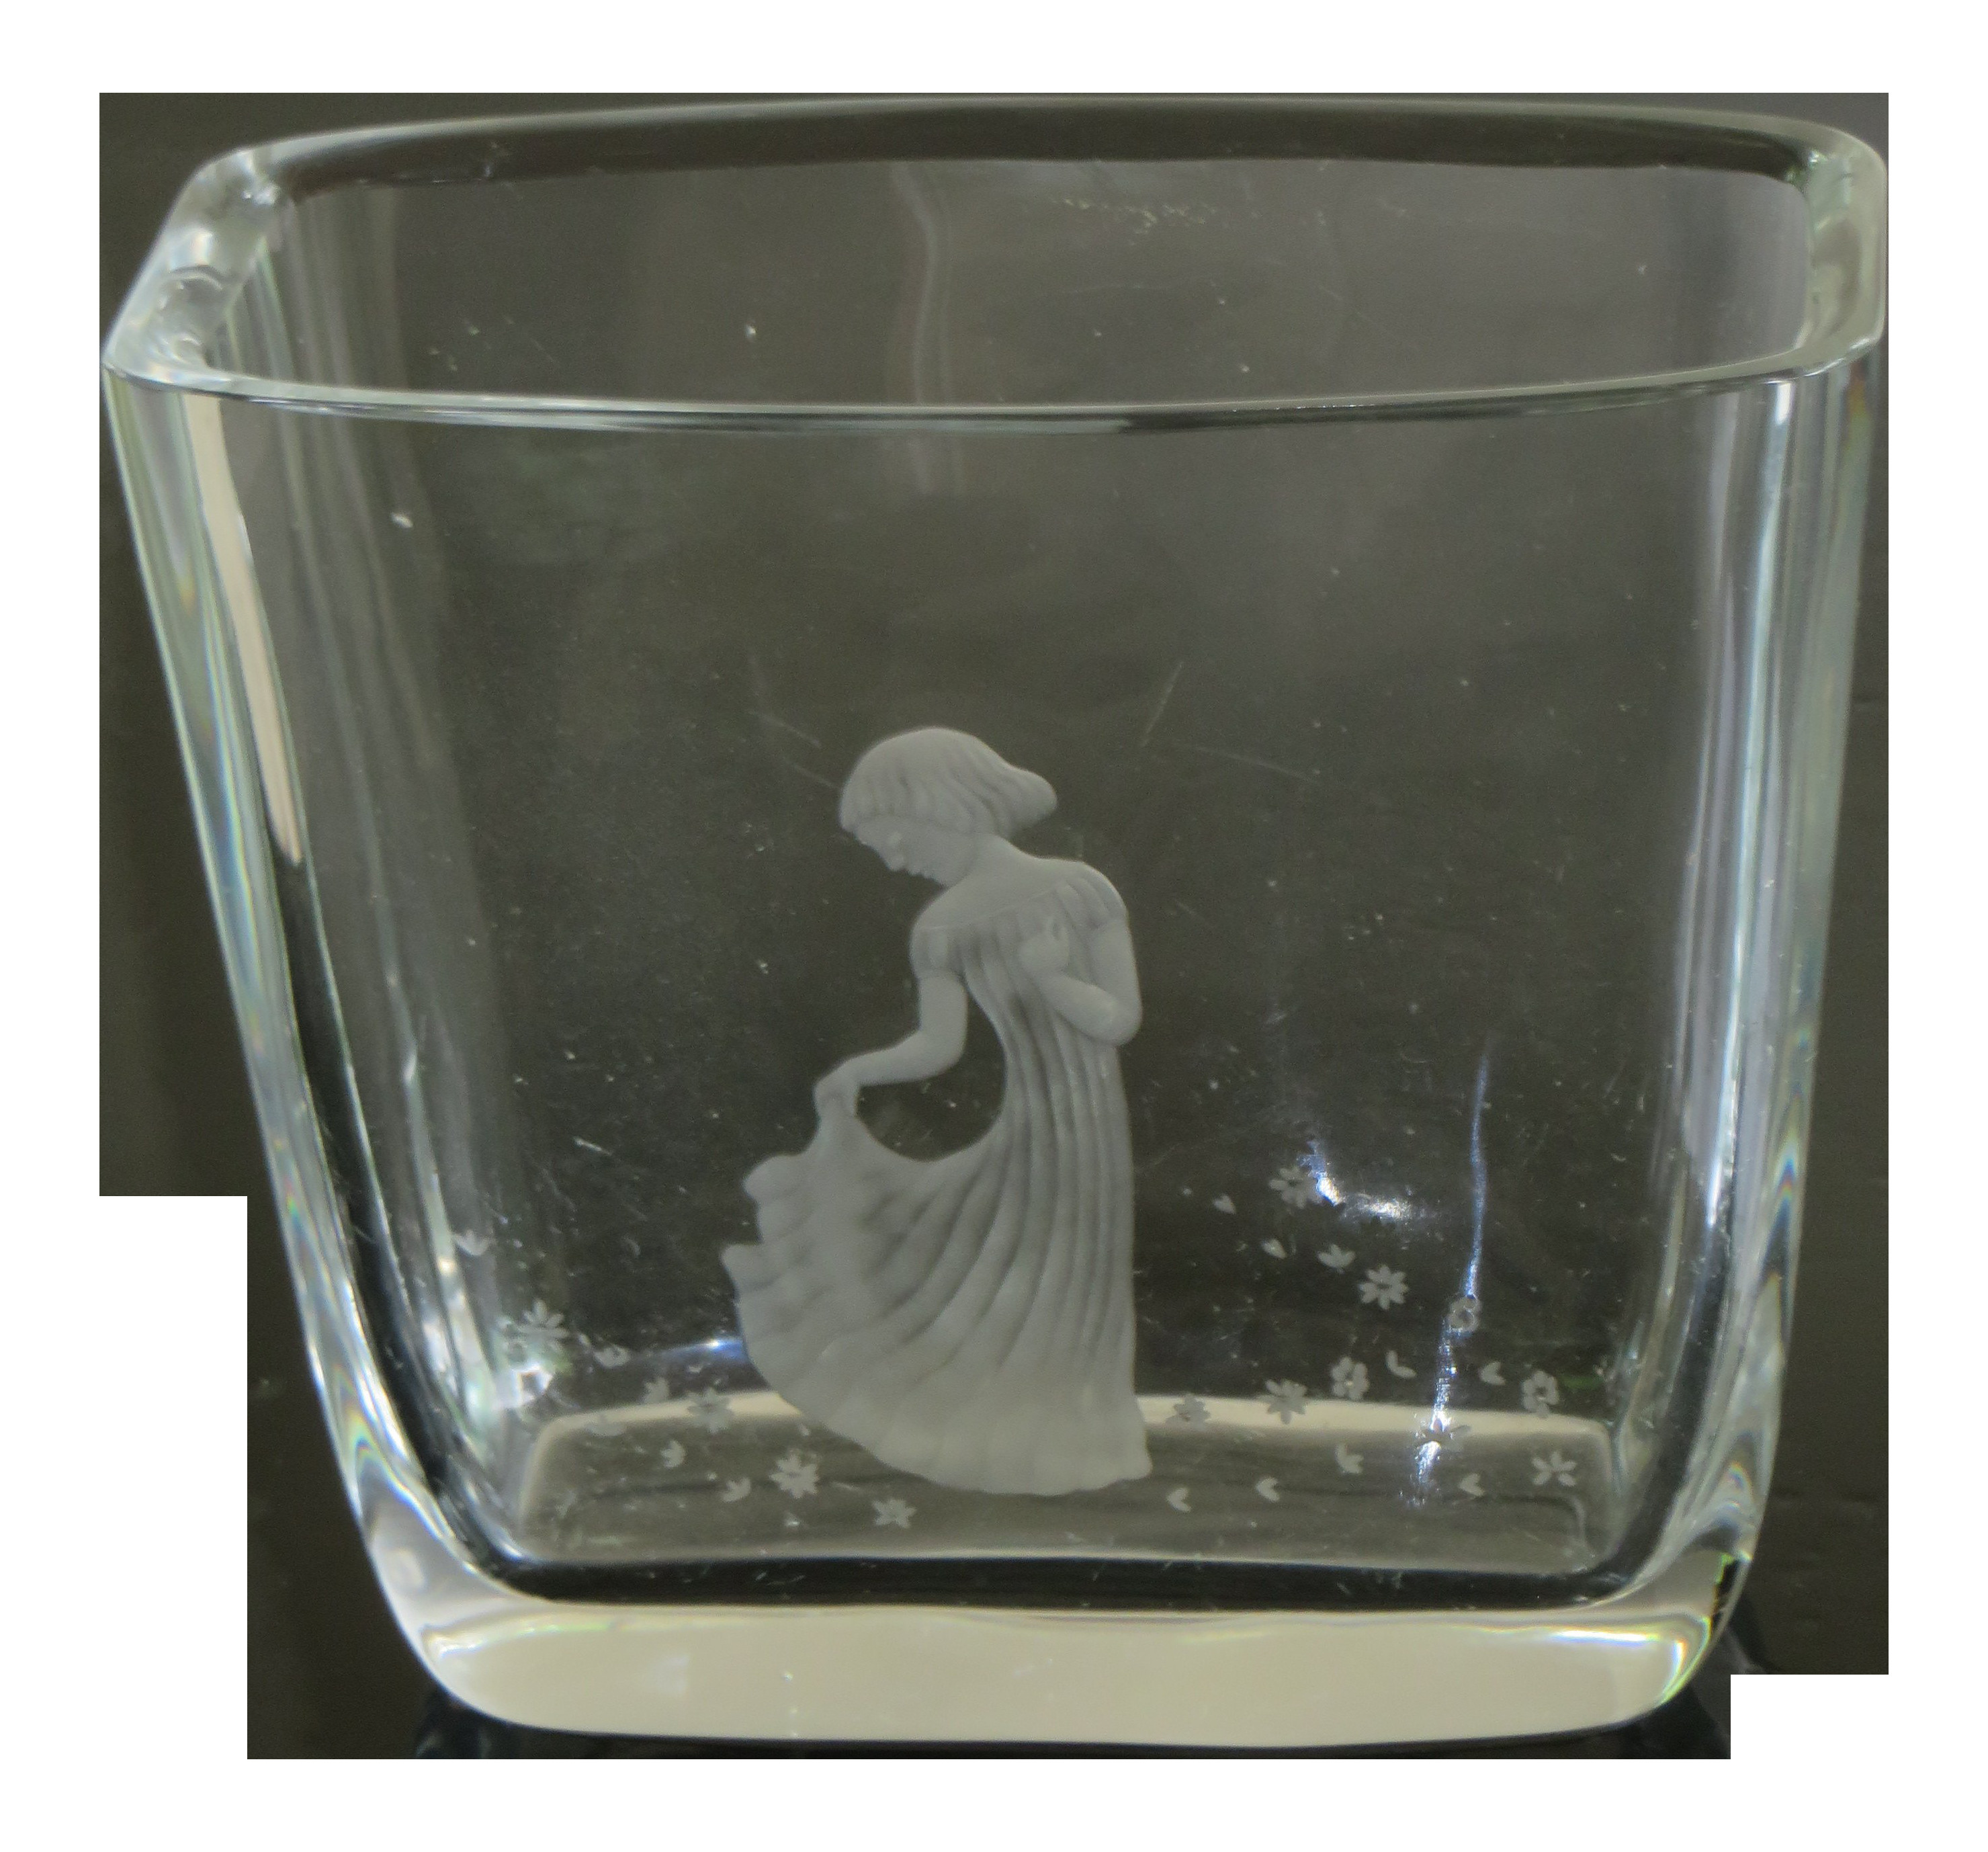 12 Nice orrefors Crystal Bud Vase 2024 free download orrefors crystal bud vase of vintage orrefors art glass vase with etched girl and flowers chairish inside vintage orrefors art glass vase with etched girl and flowers 2257